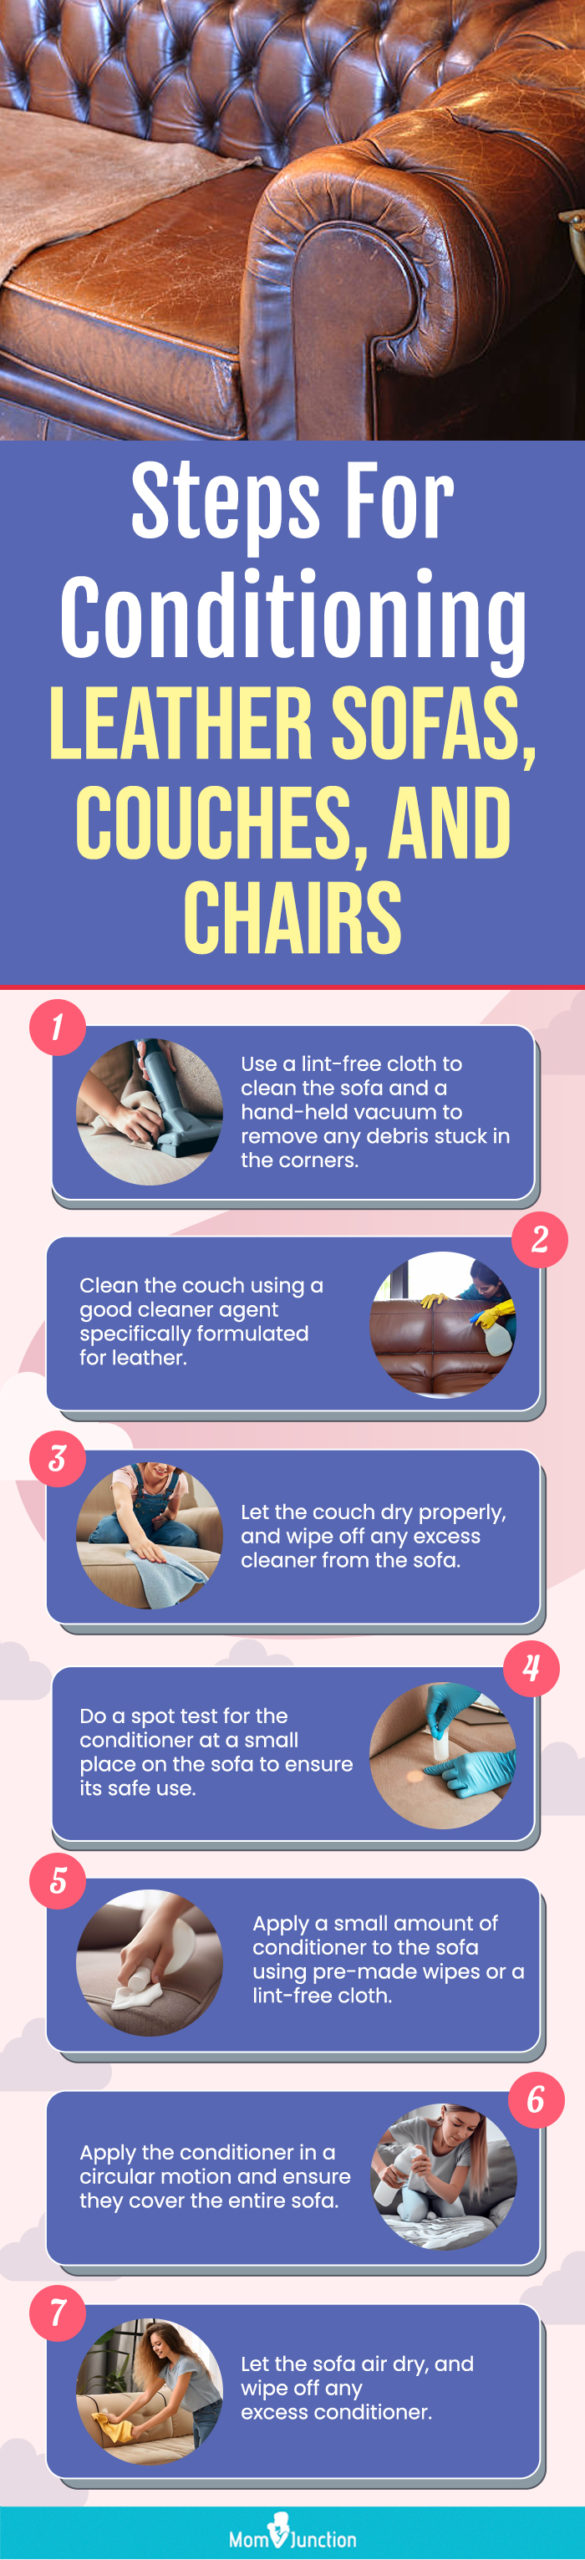 Bonded Leather Care Tips  Leather Honey Leather Care